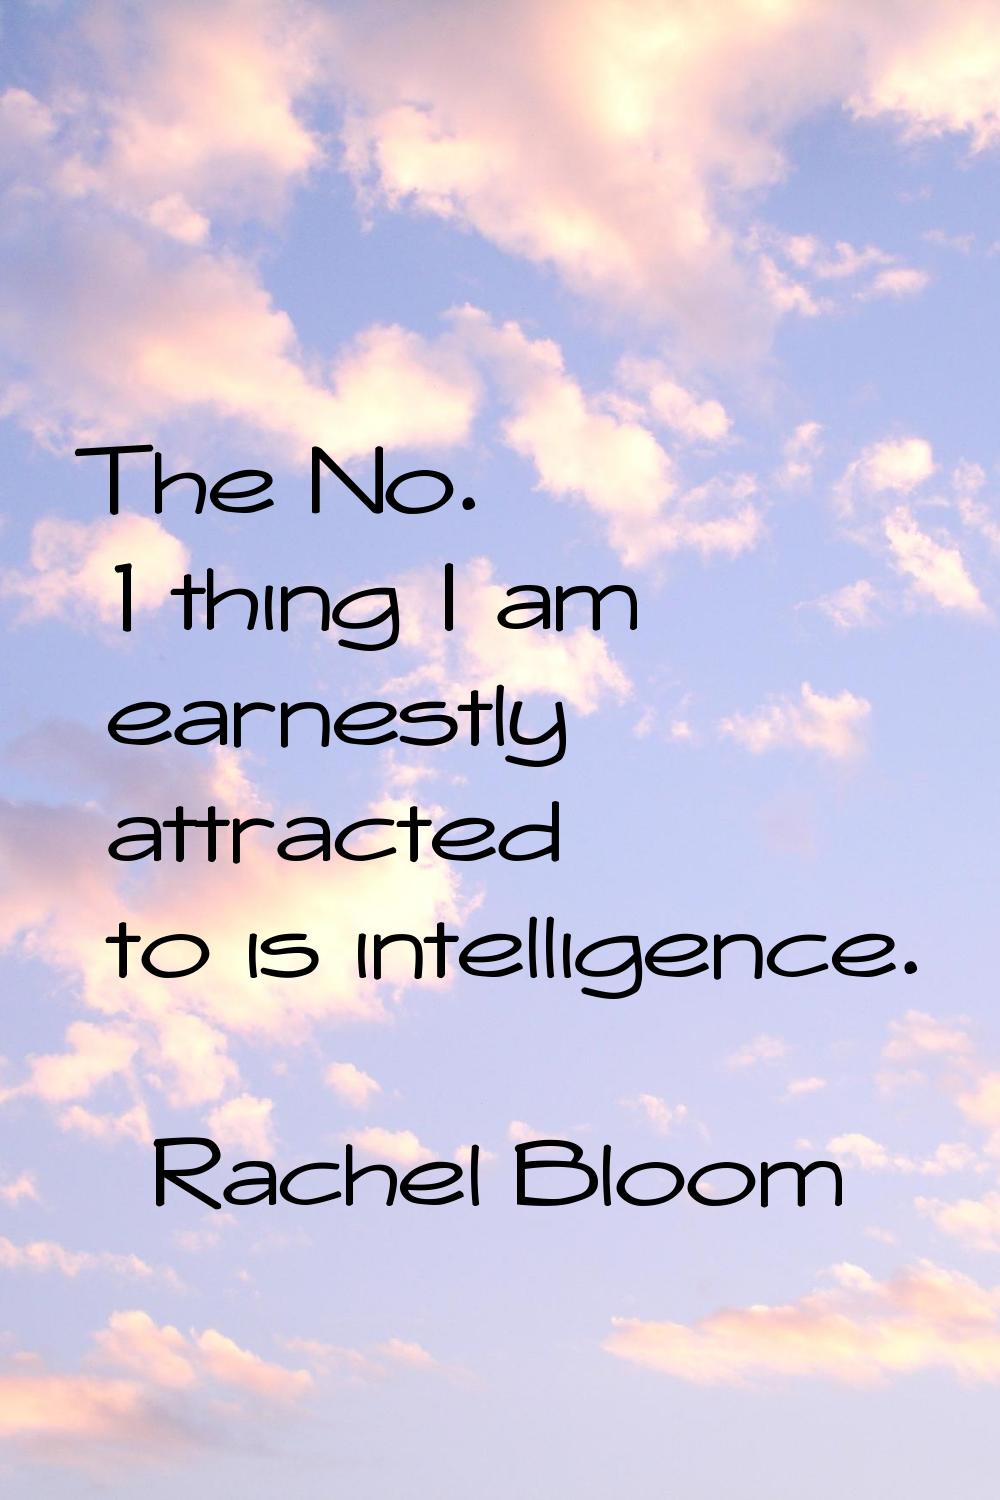 The No. 1 thing I am earnestly attracted to is intelligence.